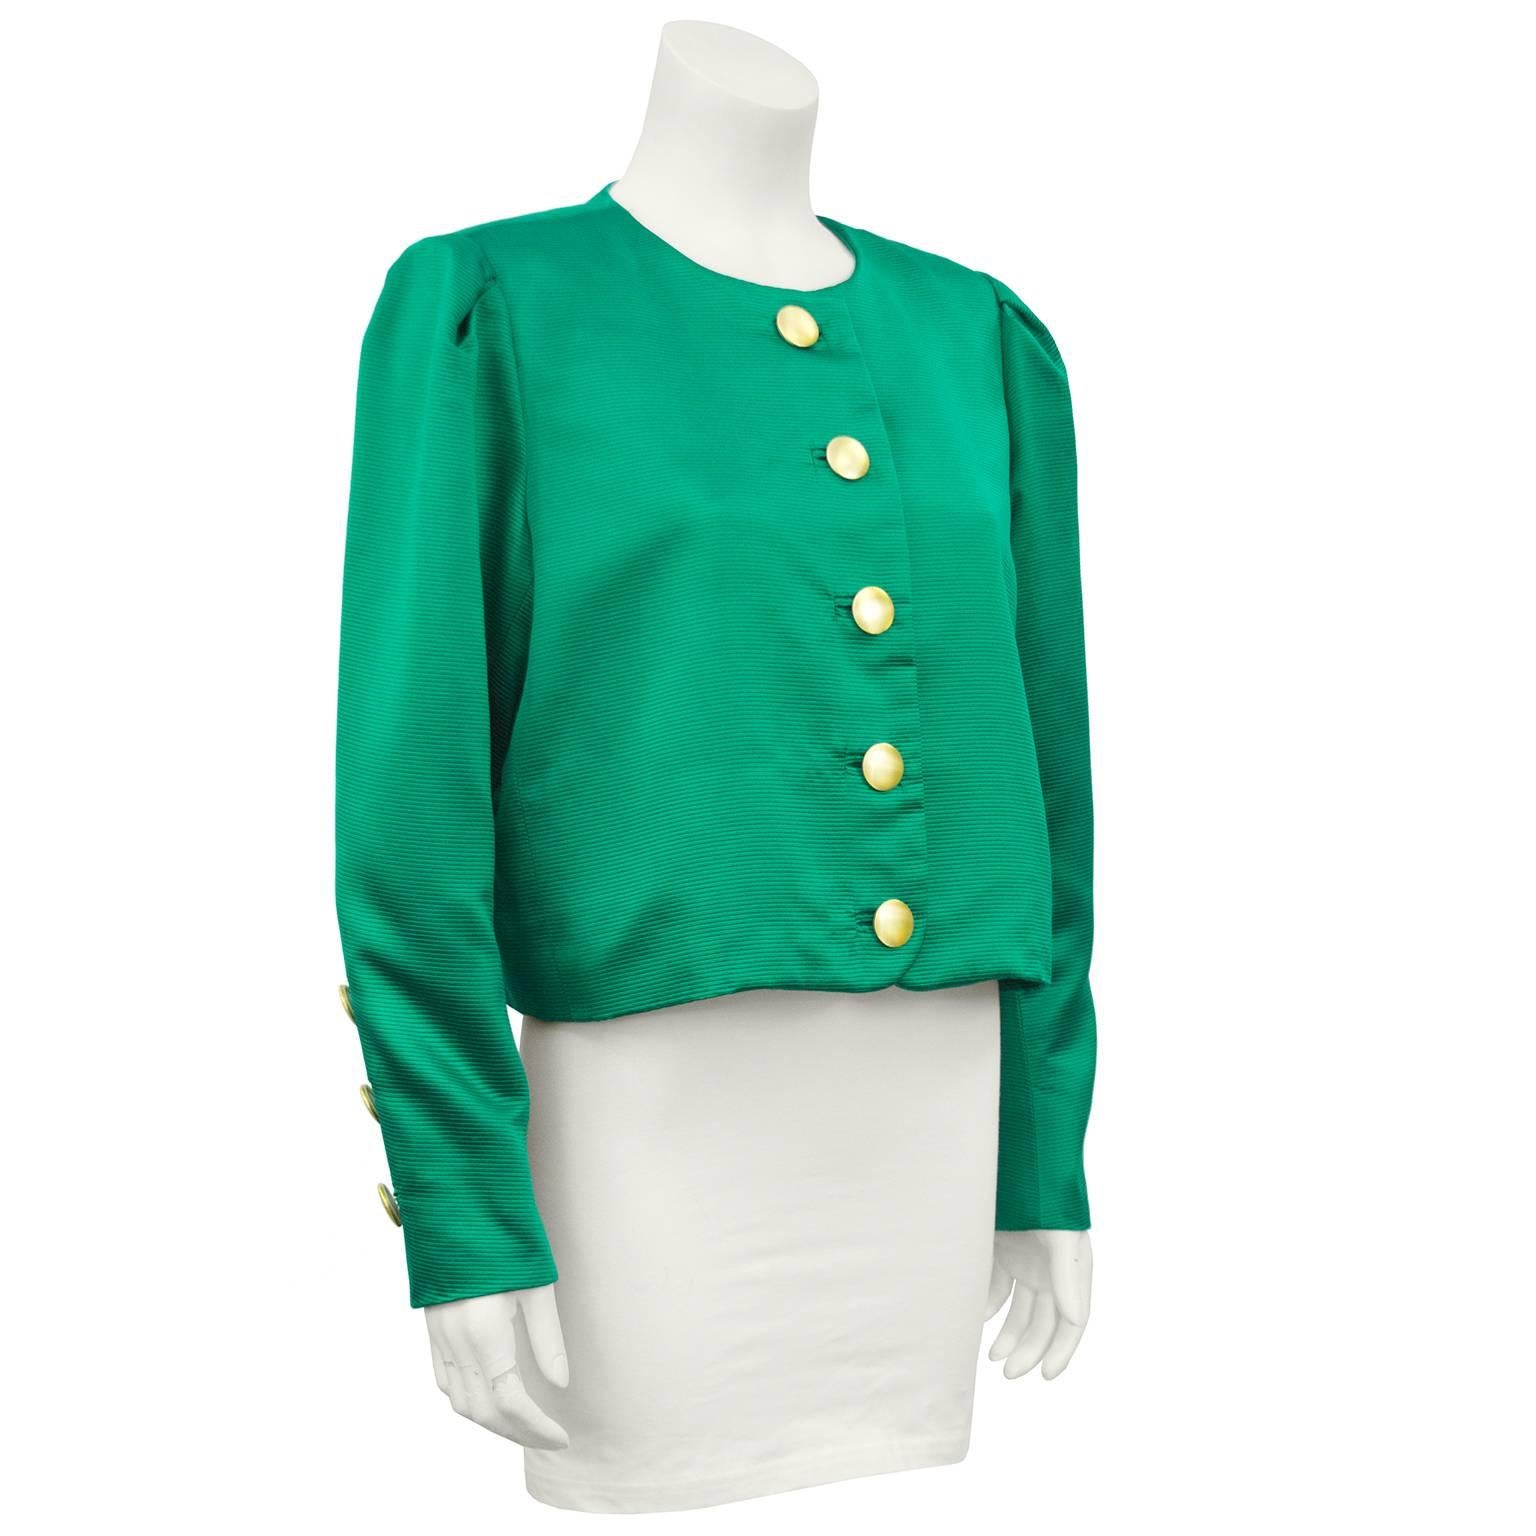 Vibrant 1980s Yves Saint Laurent ribbed emerald green silk and acetate cropped jacket. The emerald pops beautifully against the large round gold tone buttons. Monochromatic emerald green lining. Excellent vintage condition. Marked size FR 44 - fits